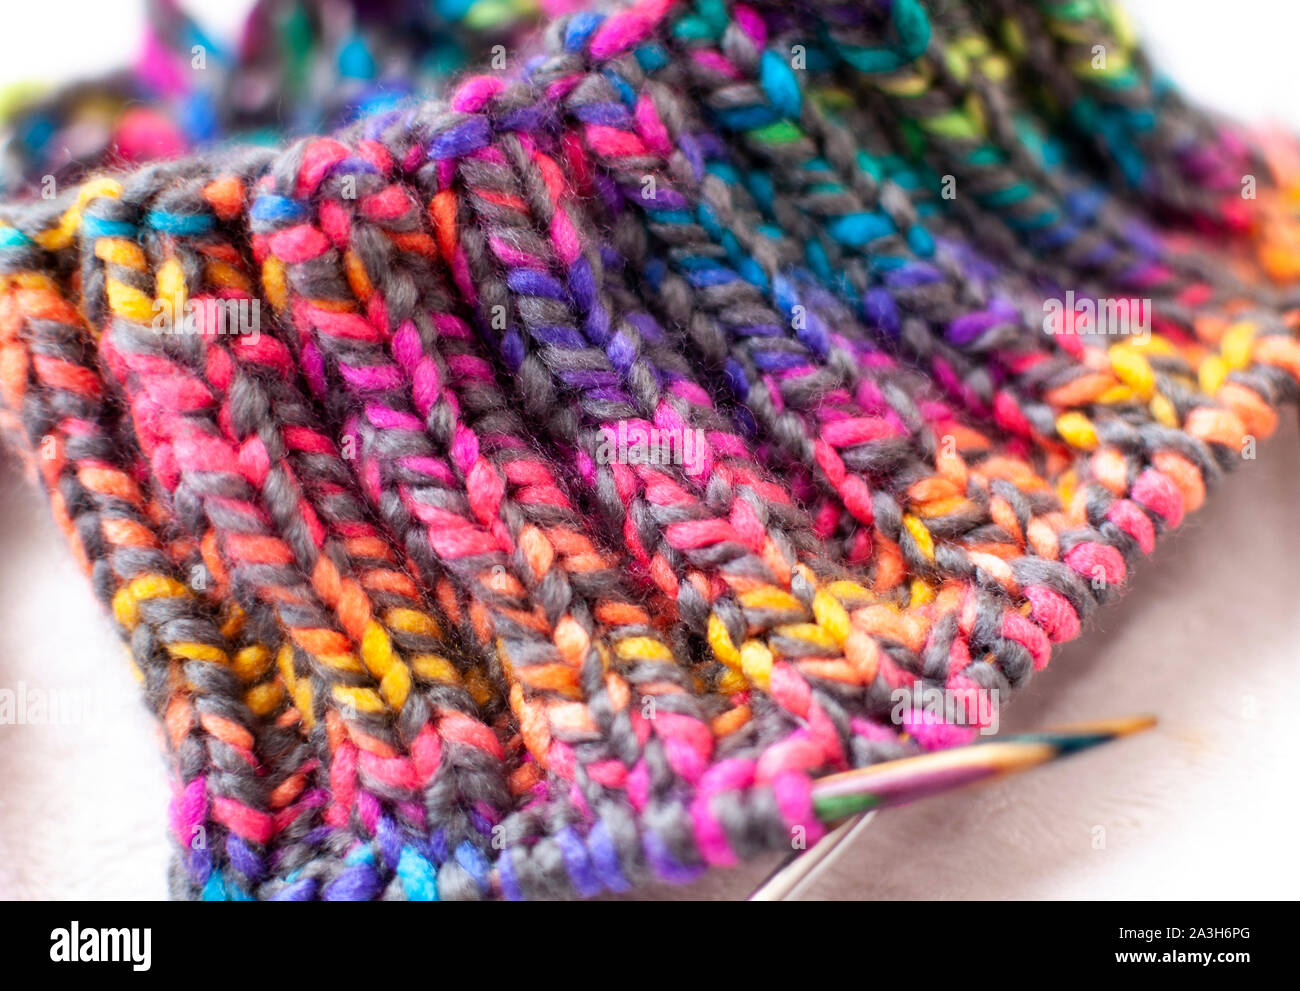 Knitting pattern texture, colorful yarn and needles close-up. Stock Photo